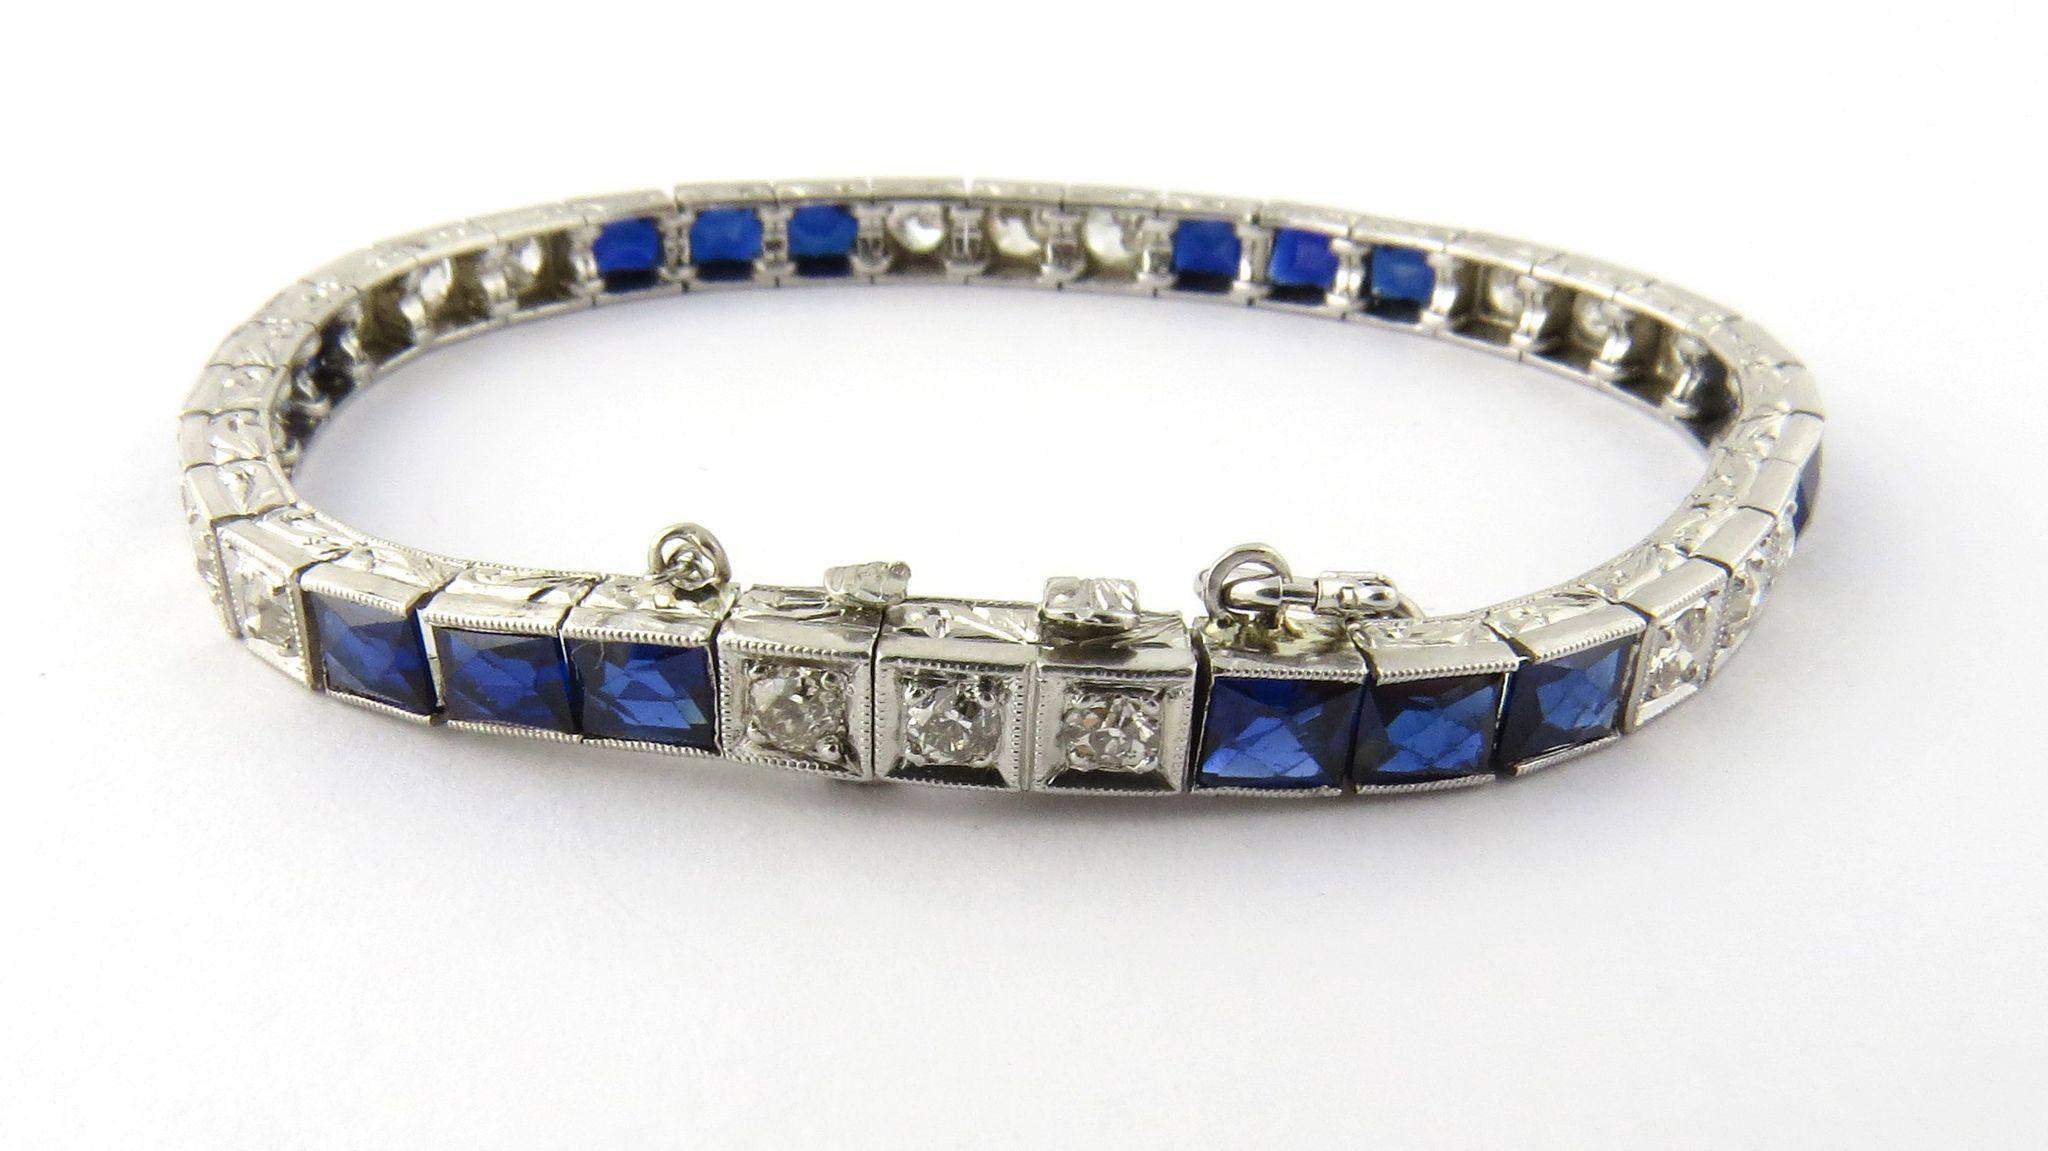 Antique Platinum Diamond and Sapphire Bracelet. 

Old miner cut diamonds and synthetic (as common in the period) rectangle cut sapphires make up this gorgeous antique bracelet with safety chain. 

Underside latch, push button clasp and safety chain